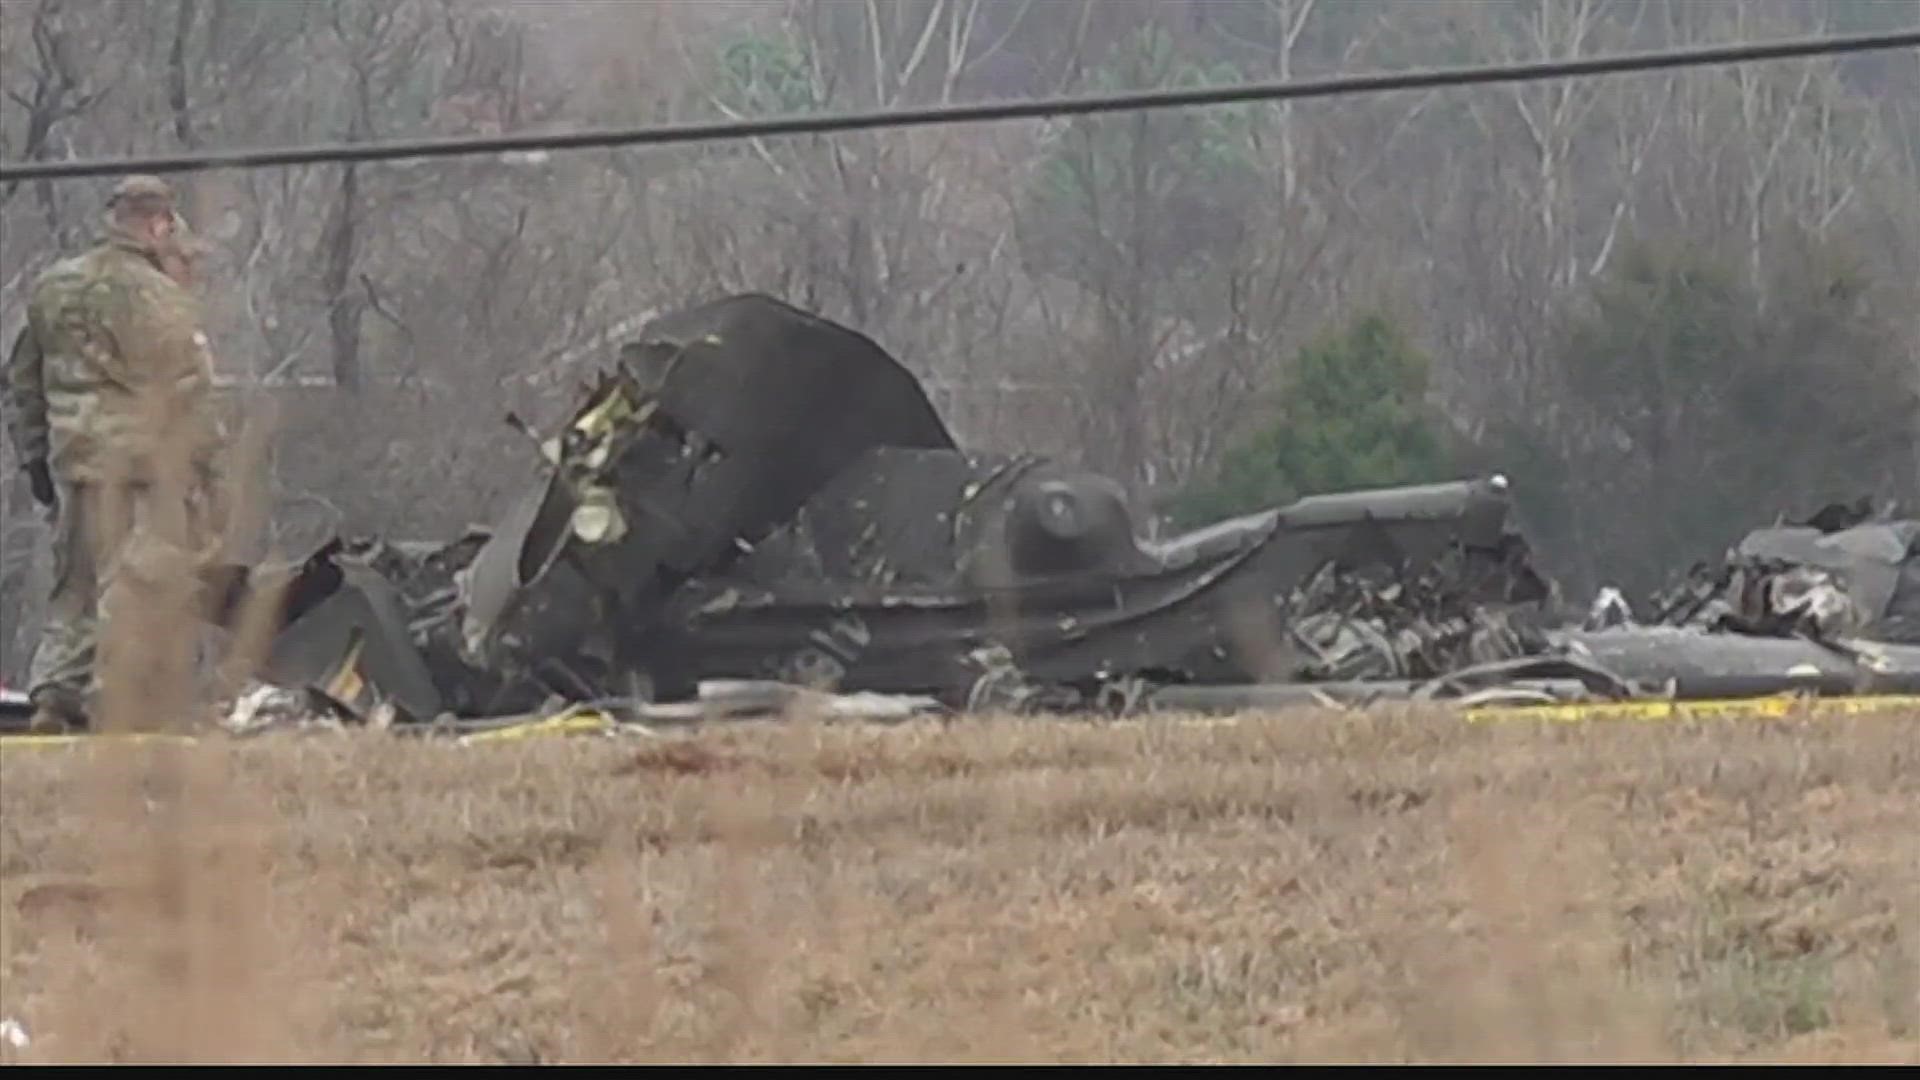 Fatal helicopter crash: 1 dead, 3 injured in chopper accident near